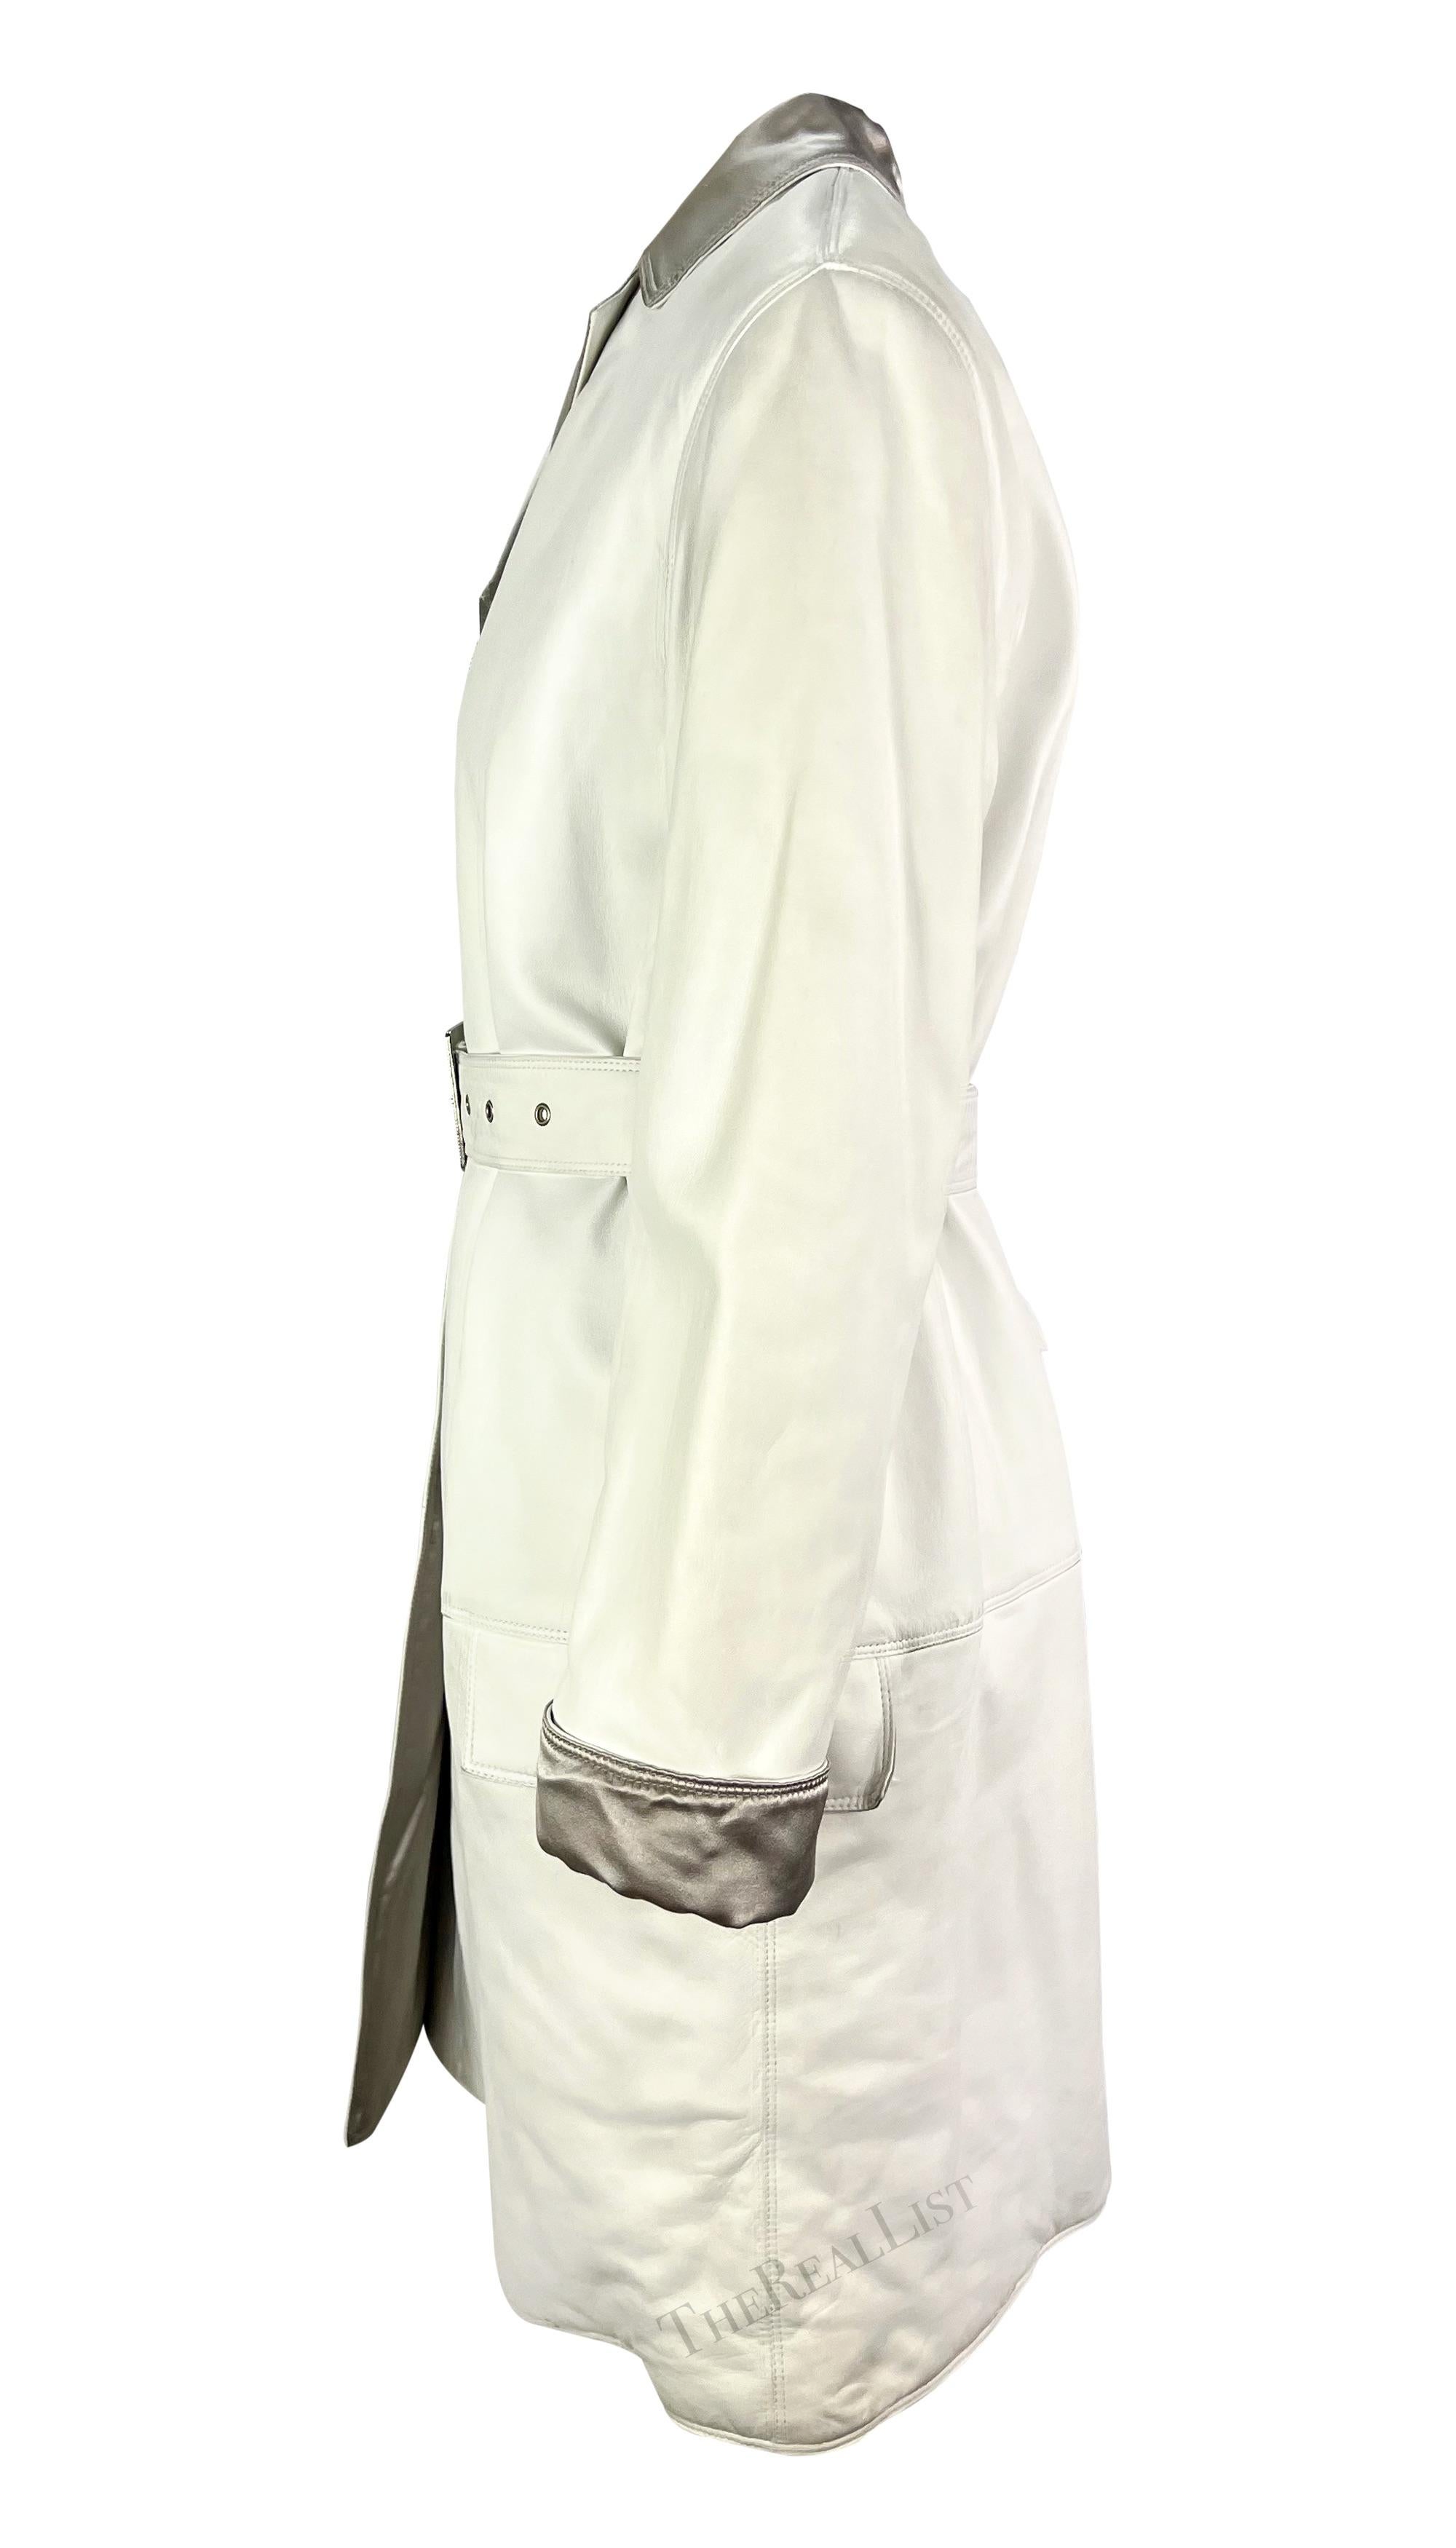 NWT F/W 1995 Gianni Versace Runway White Leather Silver Satin Medusa Car Coat For Sale 3